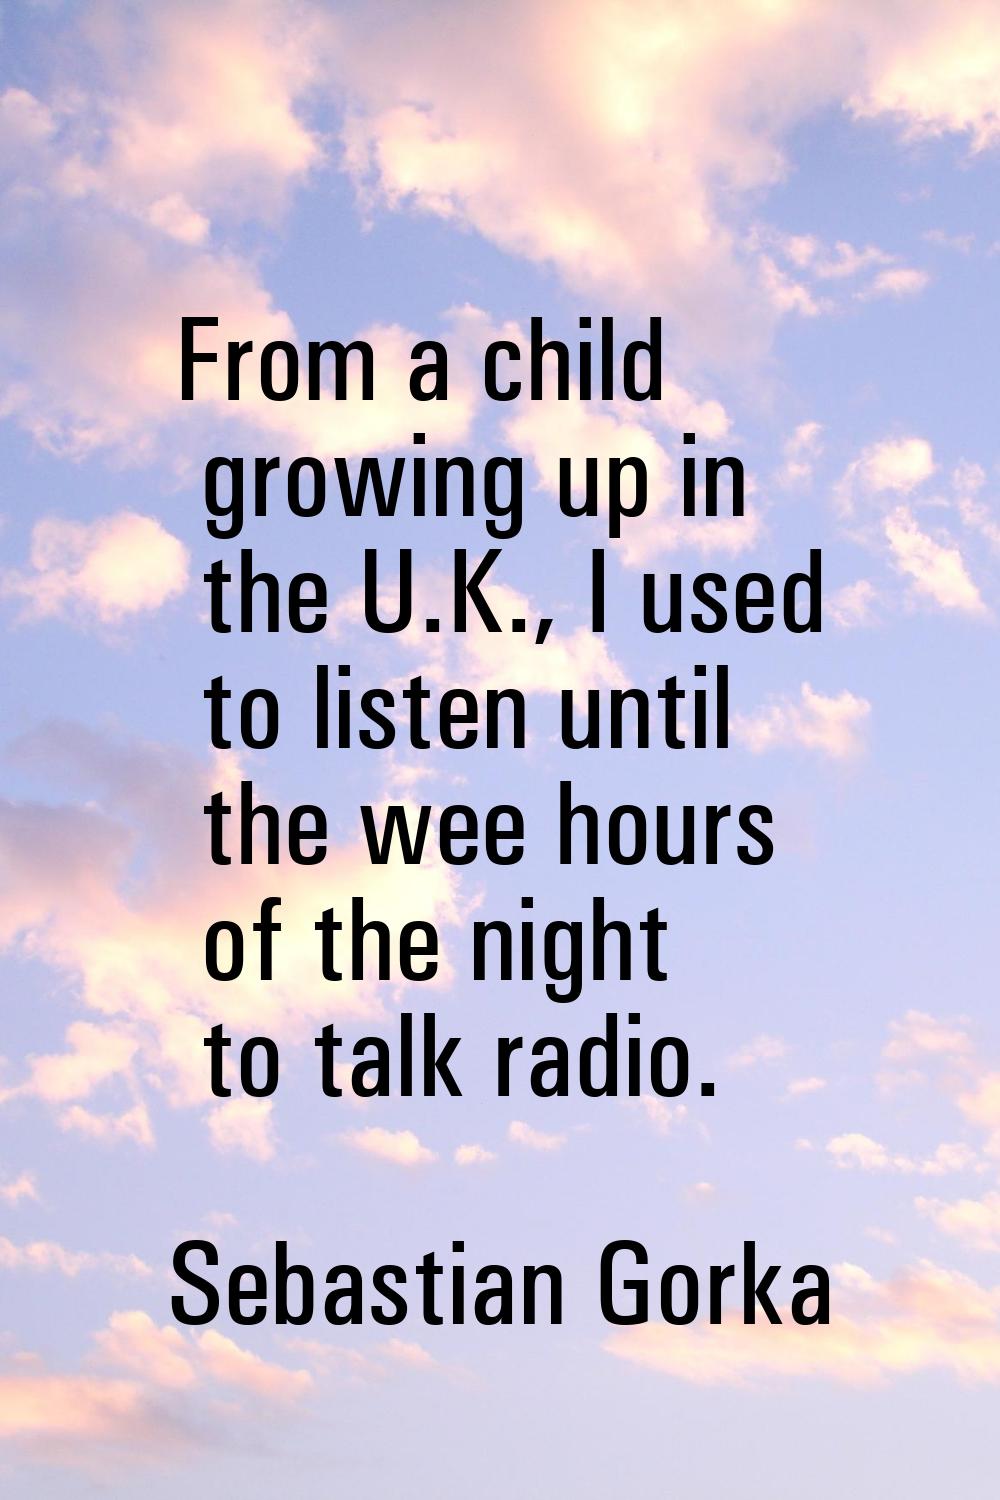 From a child growing up in the U.K., I used to listen until the wee hours of the night to talk radi